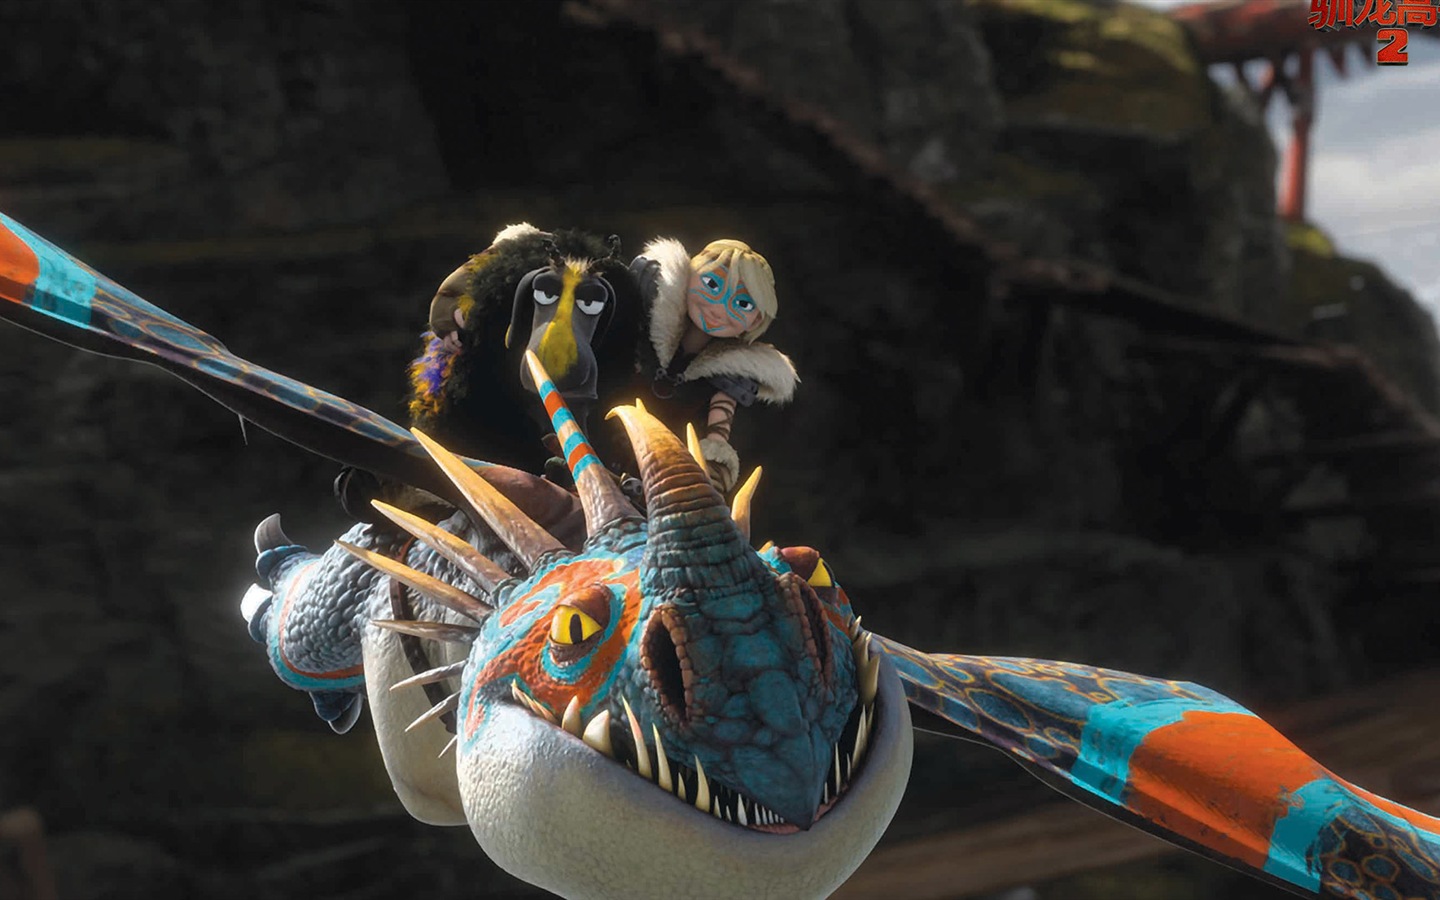 How to Train Your Dragon 2 驯龙高手2 高清壁纸11 - 1440x900